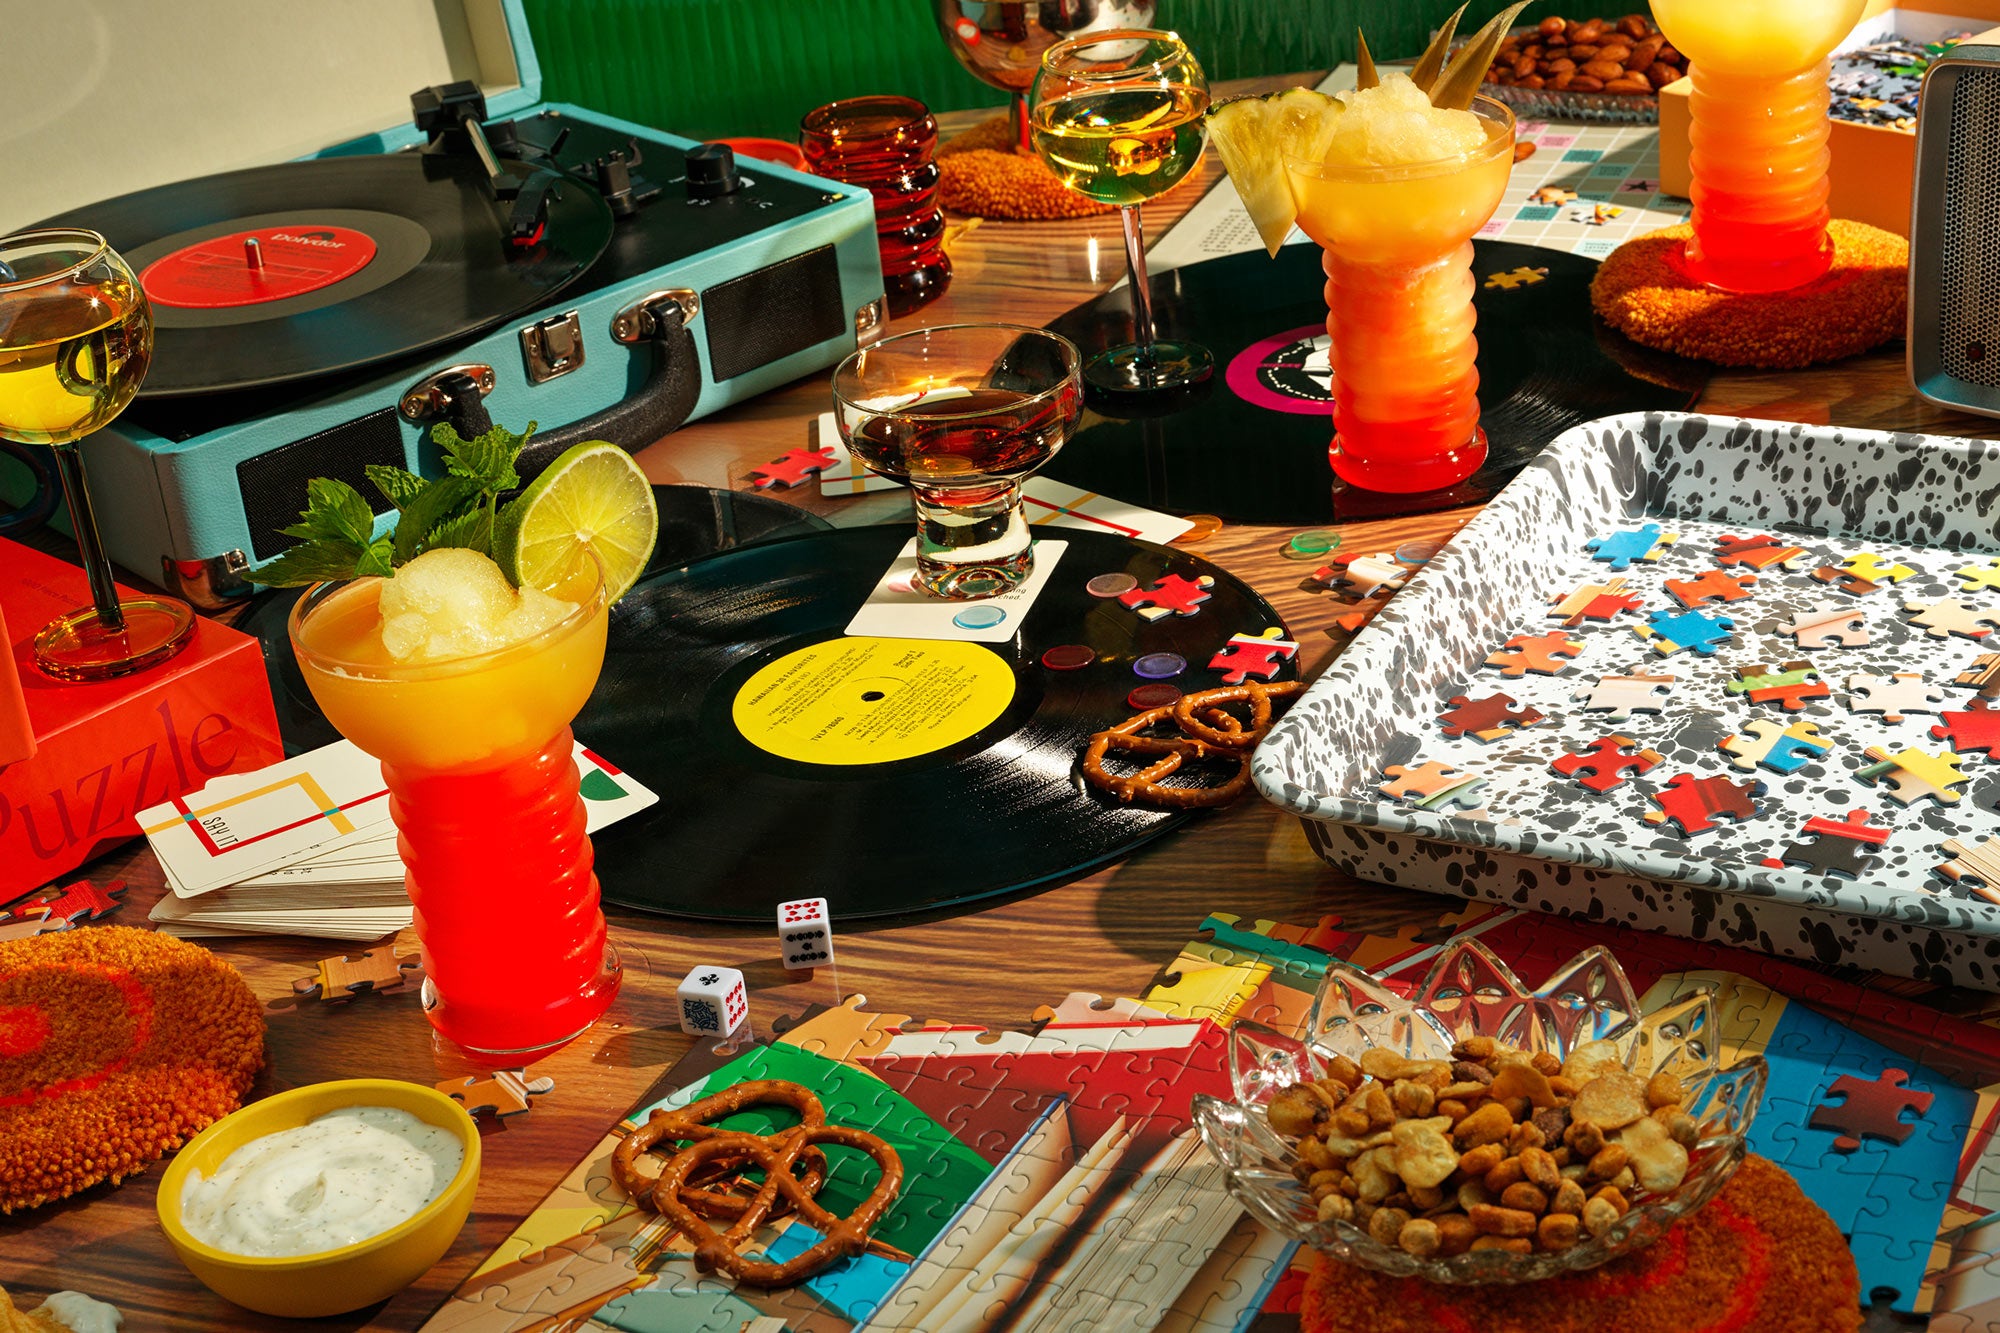 A table scene featuring a record player, cocktails and a puzzle tray filled with puzzle pieces.